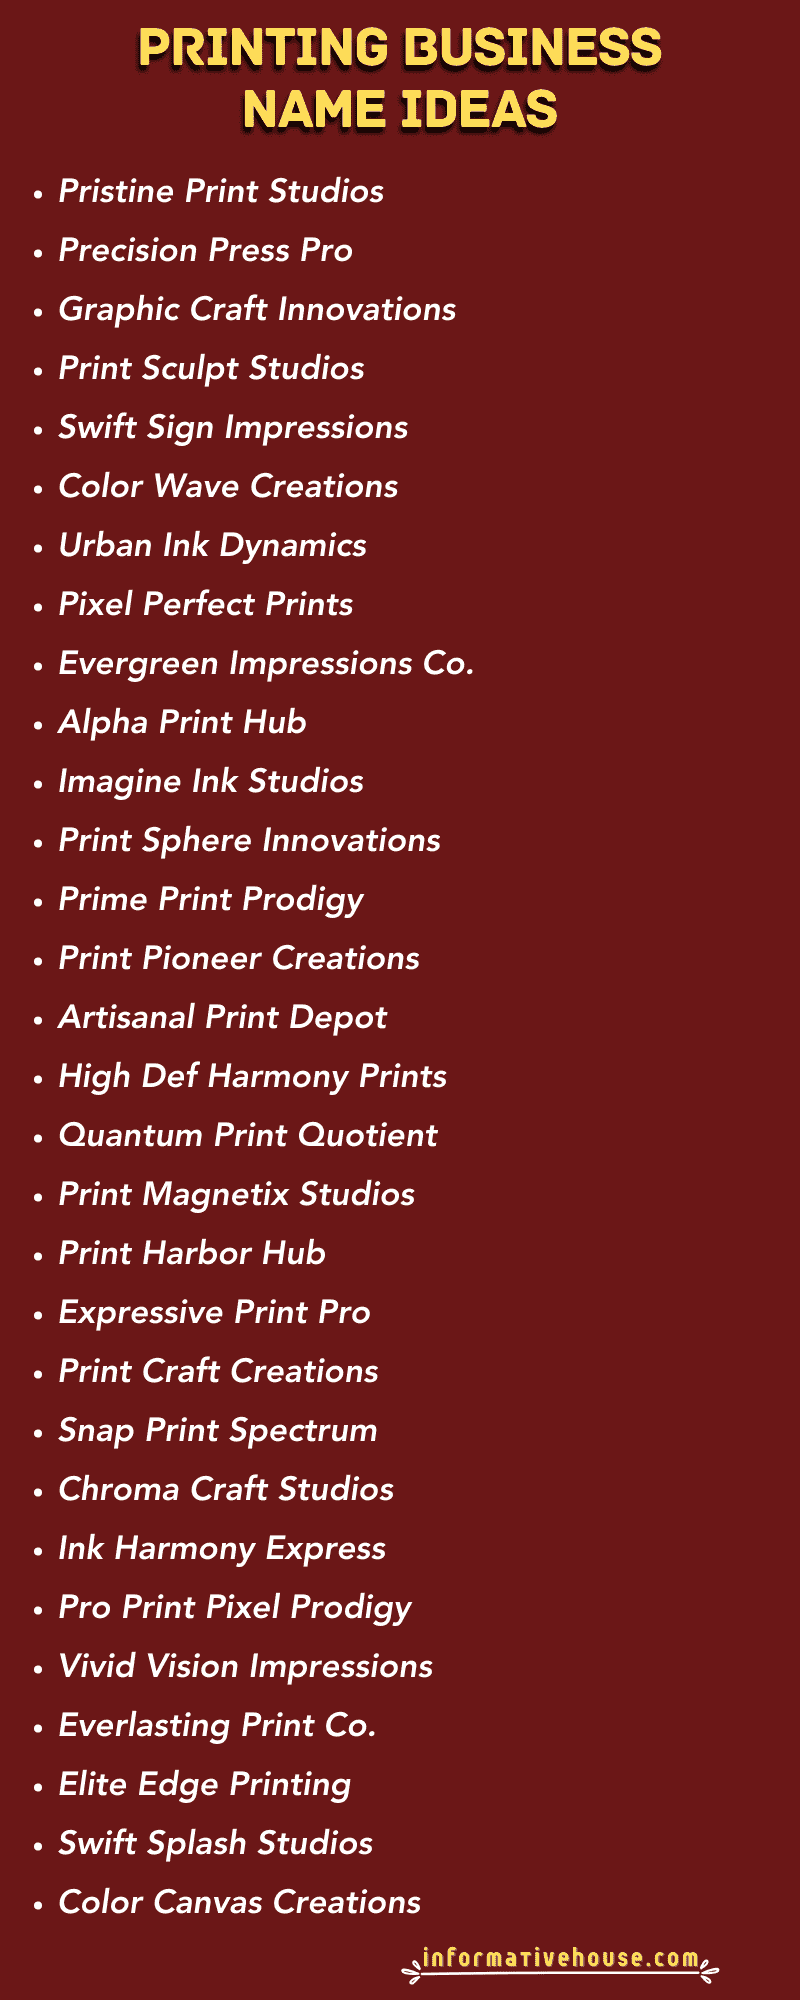 Best Printing Business Name Ideas for startup